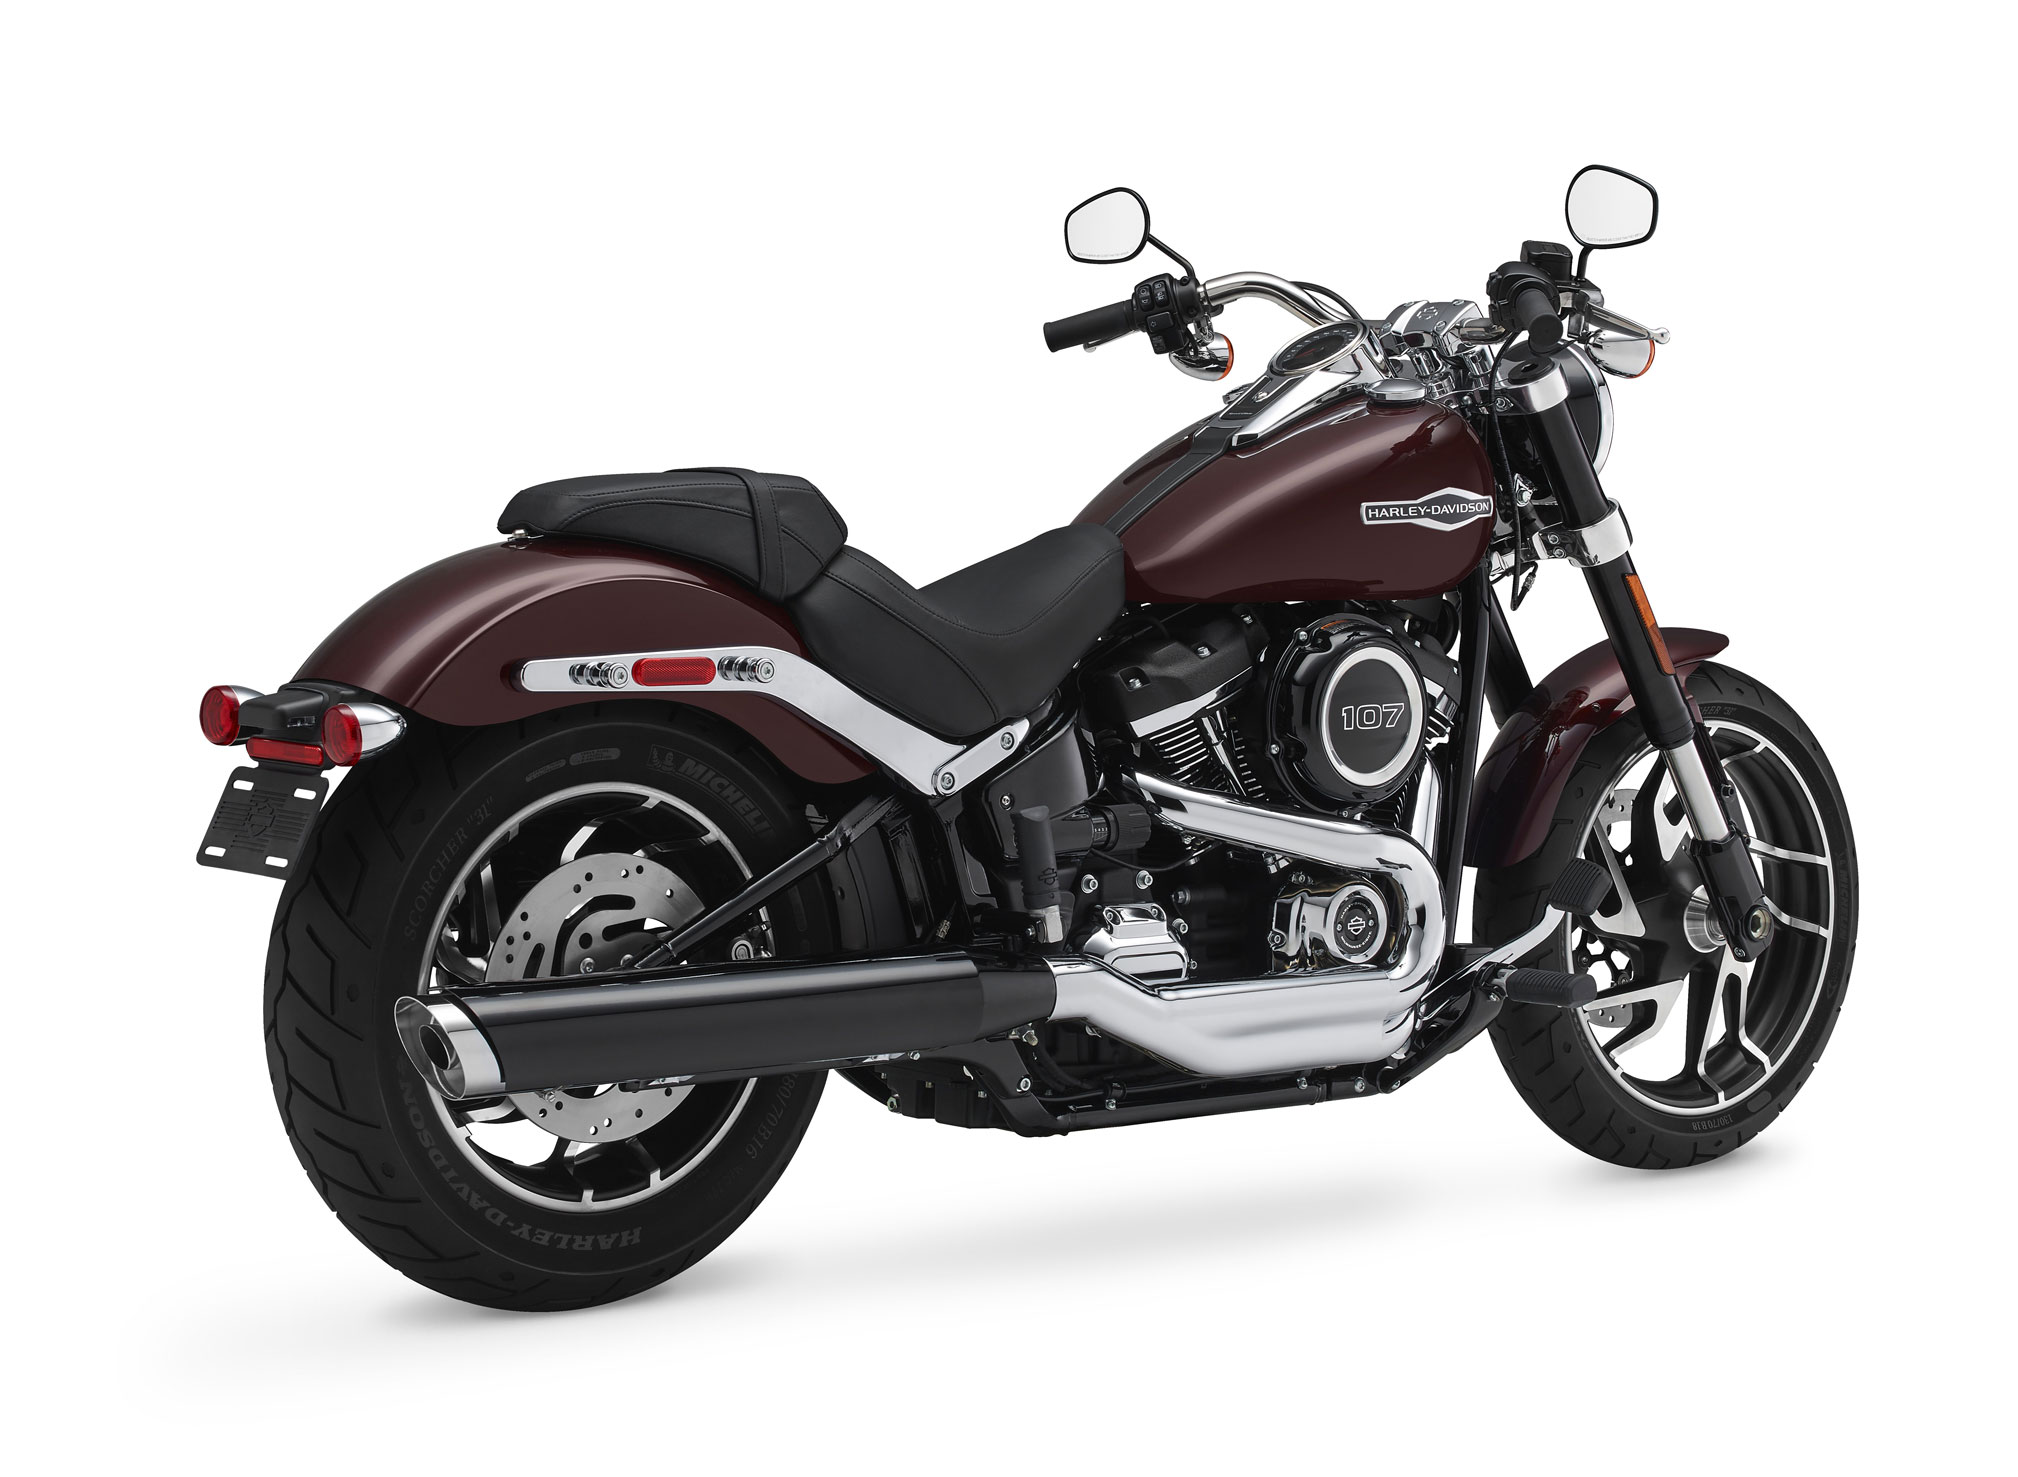 2018 Harley Davidson Sport Glide Review Total Motorcycle